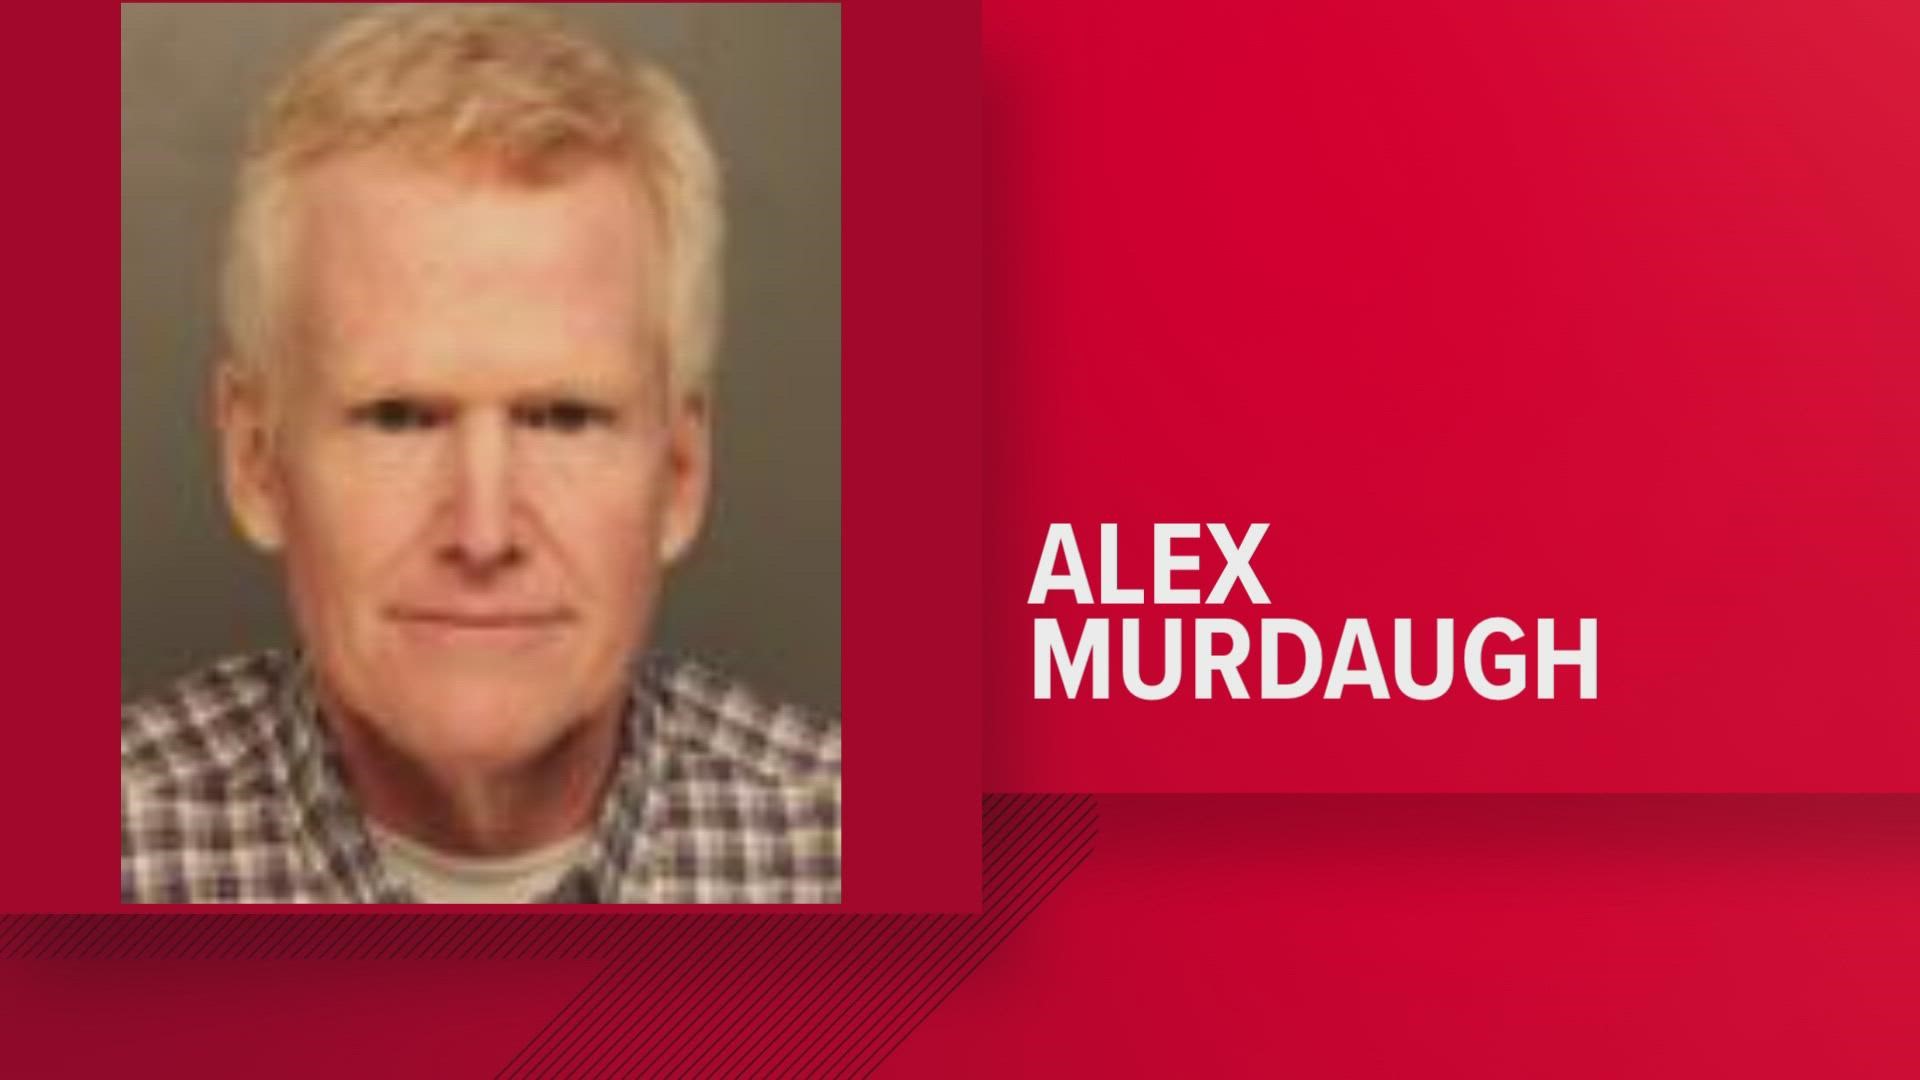 The jury returned a guilty verdict against Alex Murdaugh. Here's legal analysis of the jury's decision.